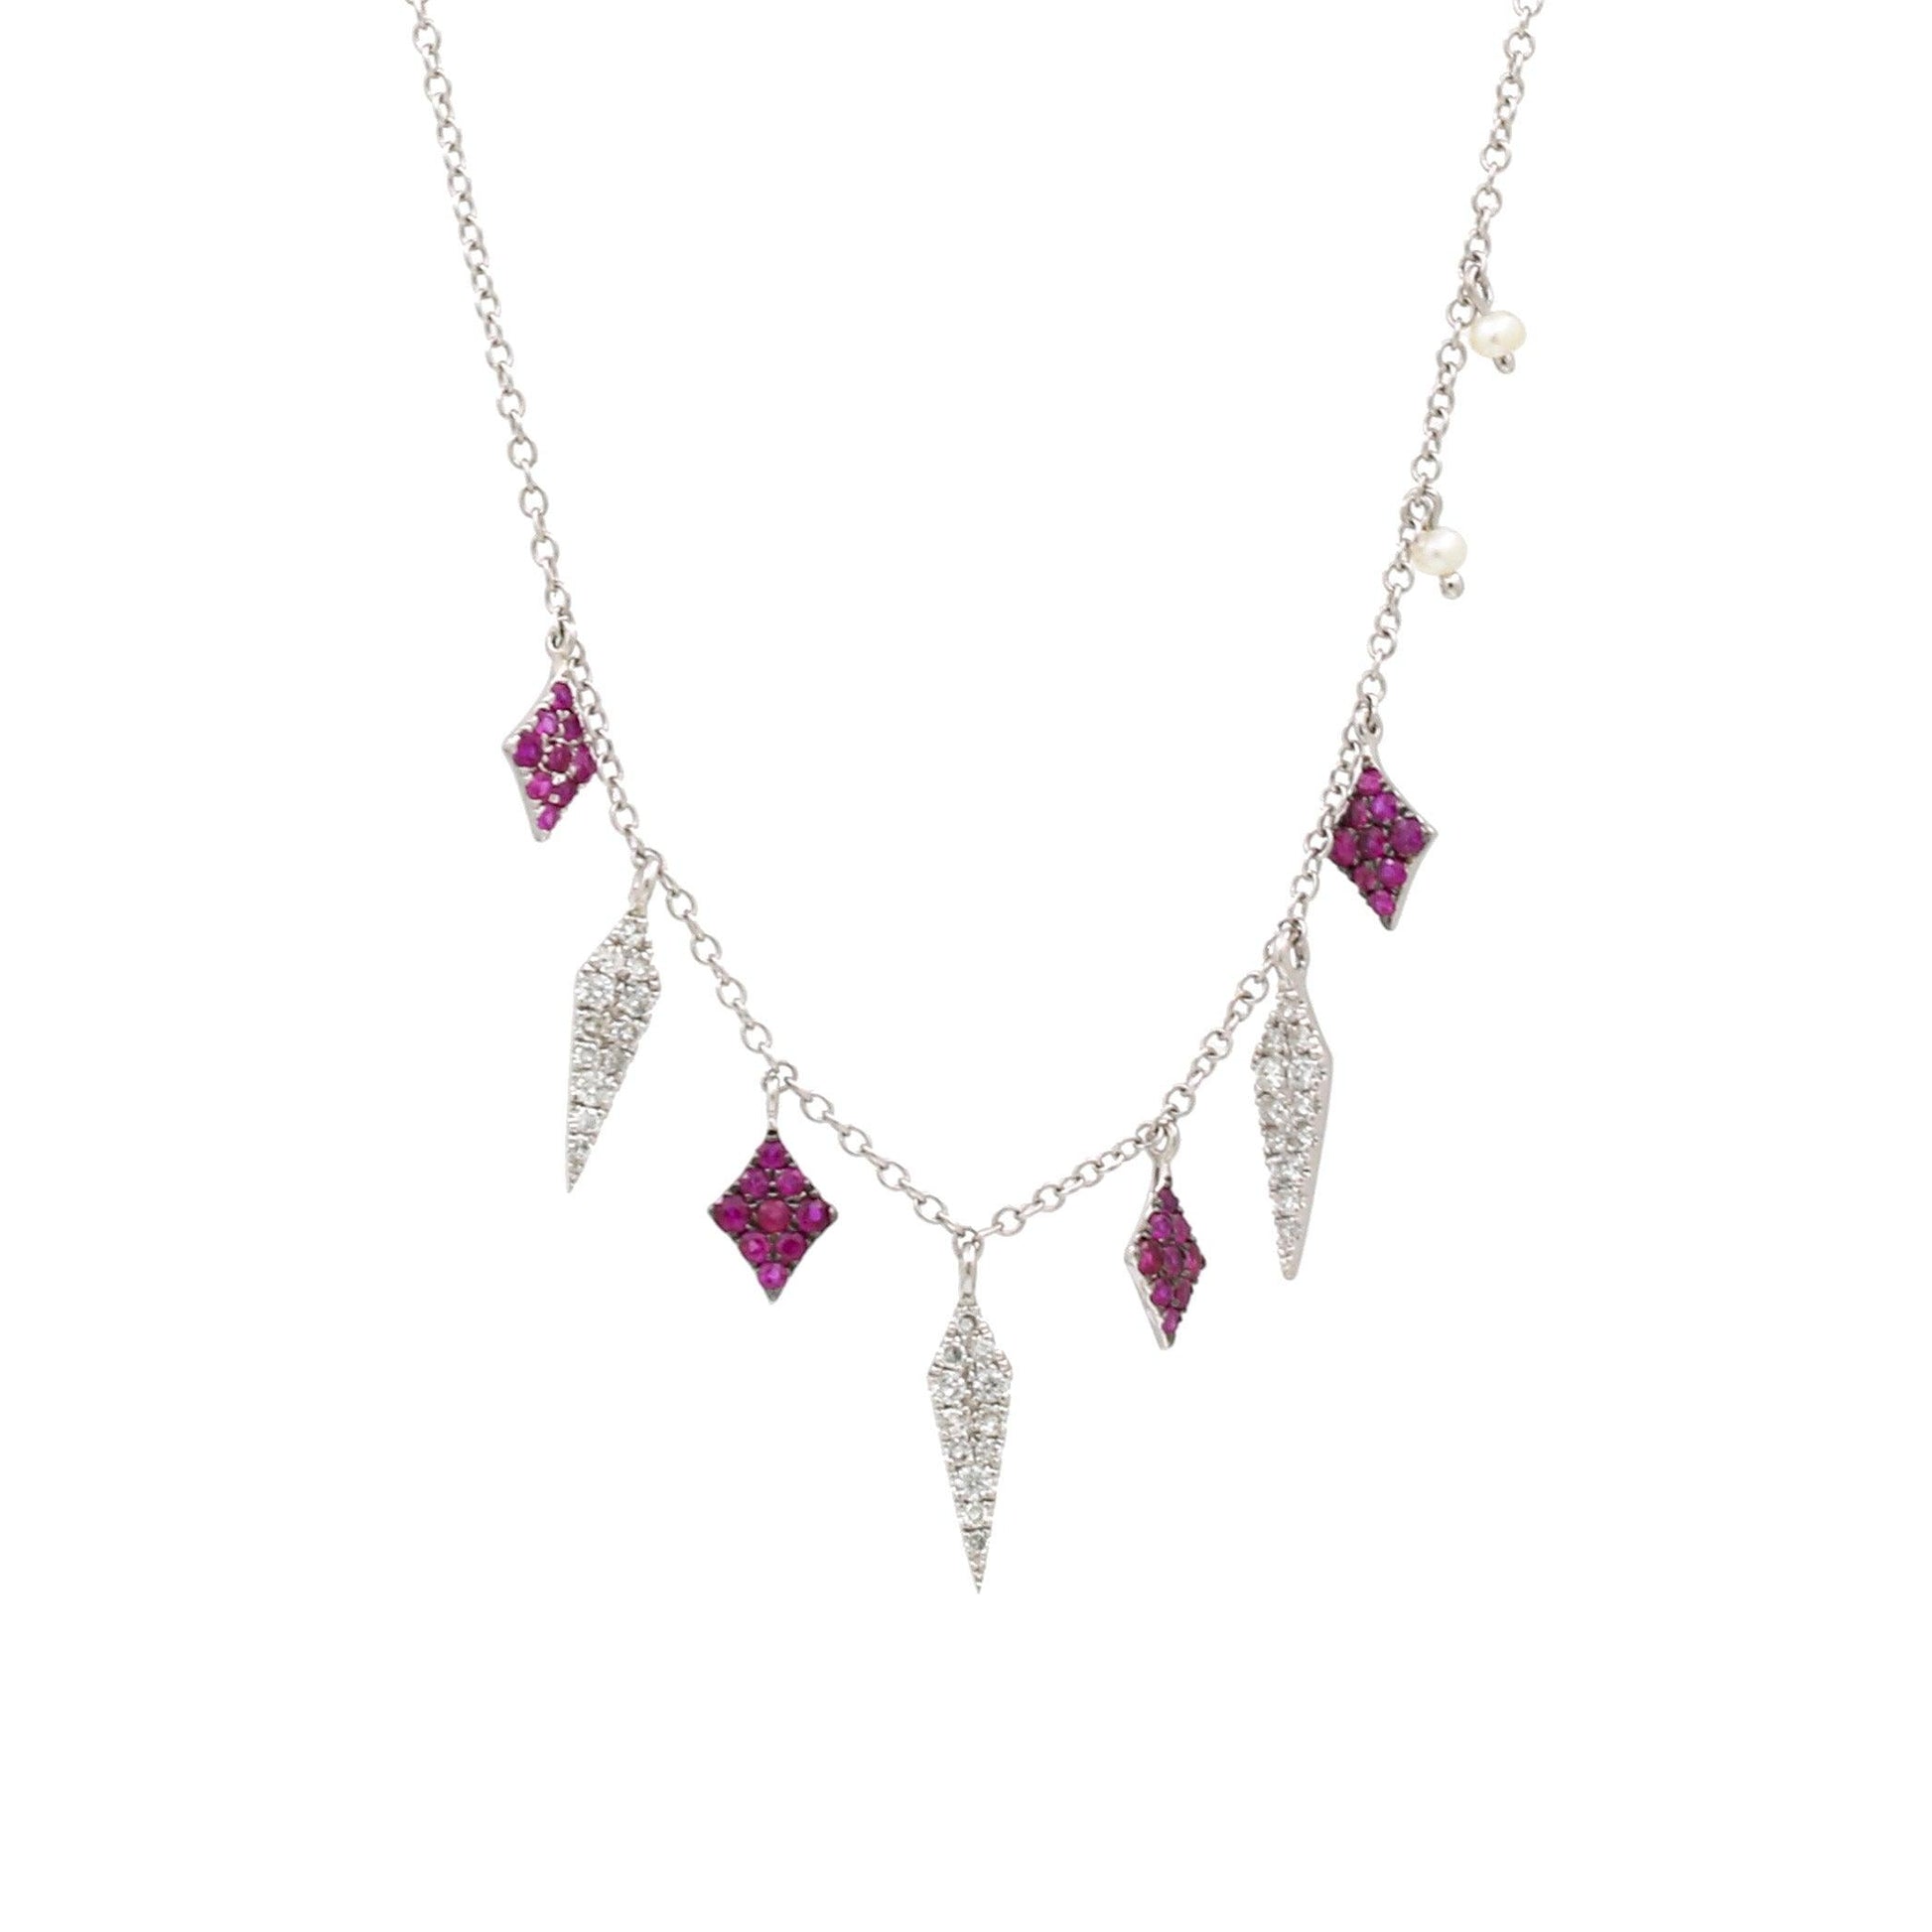 Women's Pave Diamond Ruby Dangling Charms Necklace in 14k White Gold - 31 Jewels Inc.